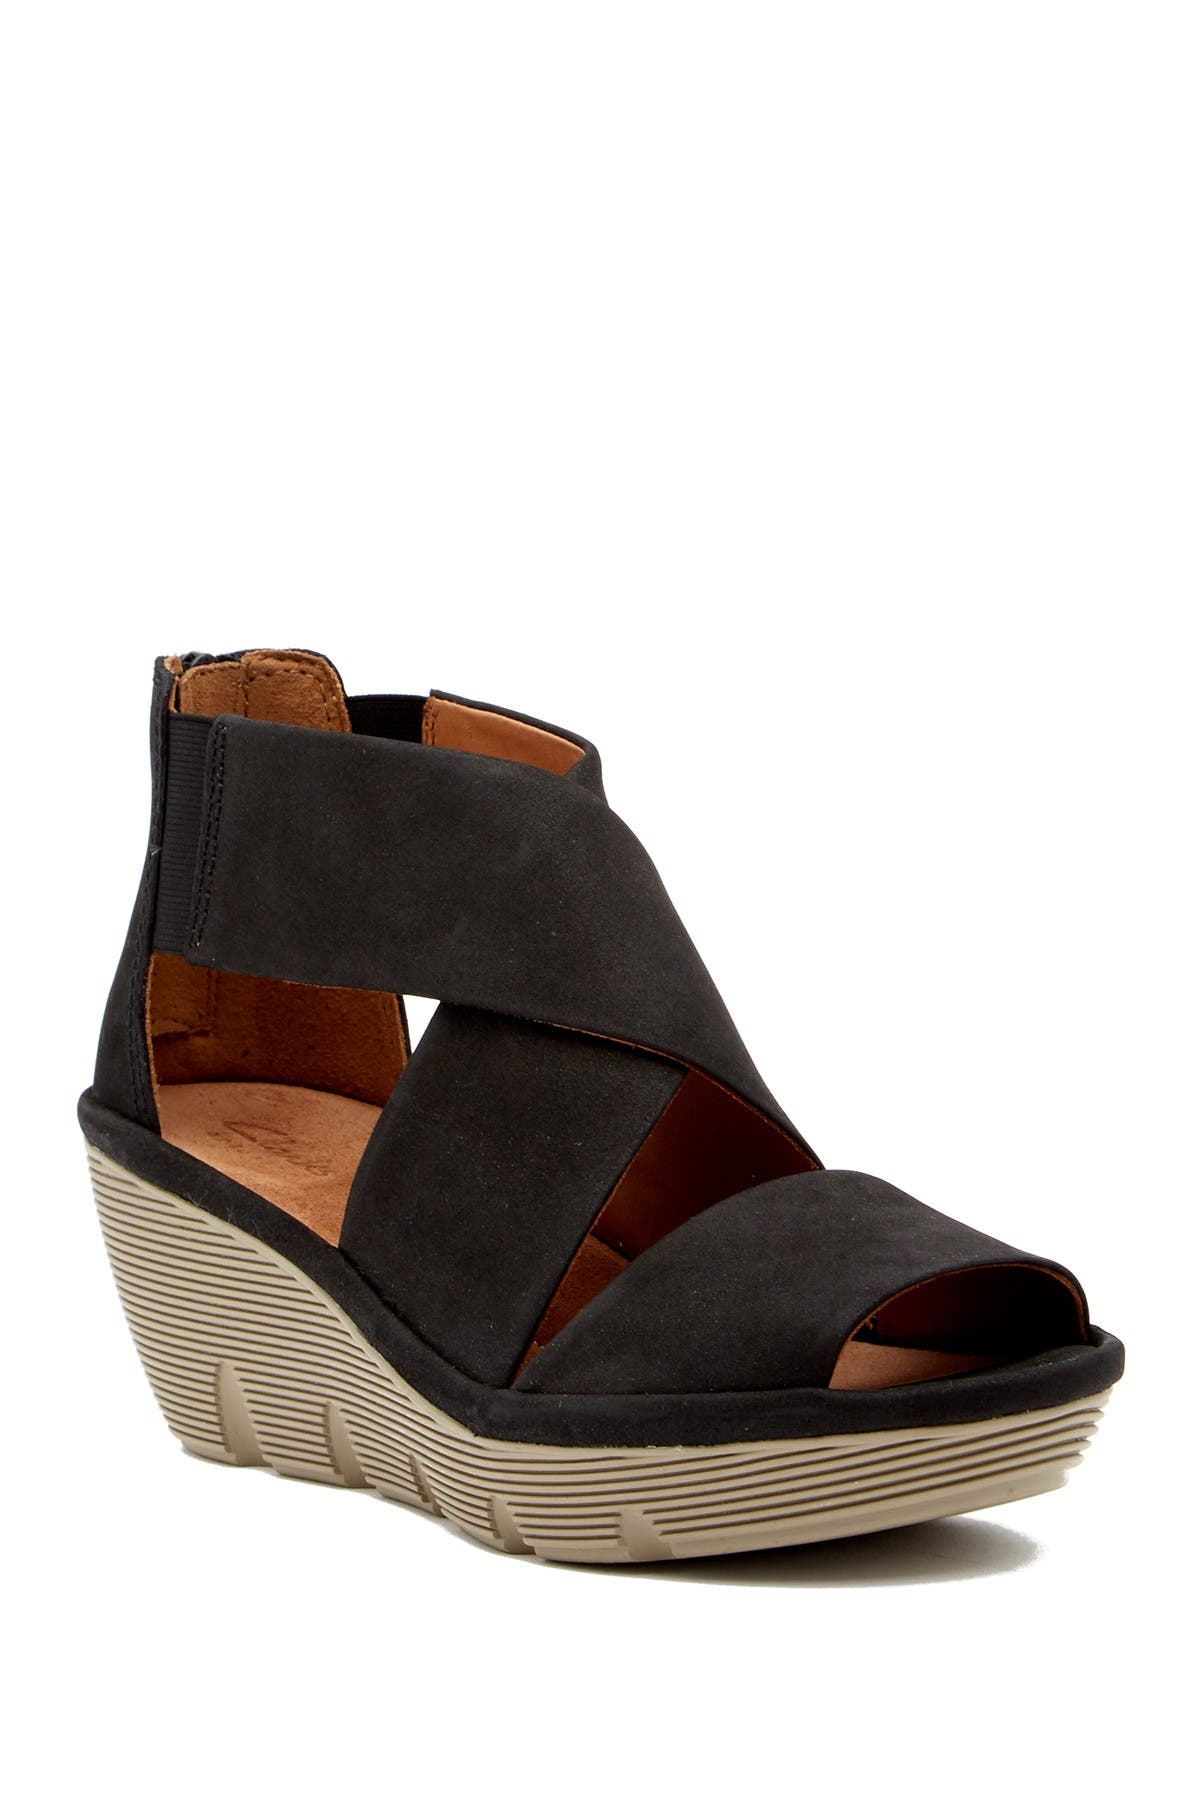 nordstrom rack clarks womens shoes